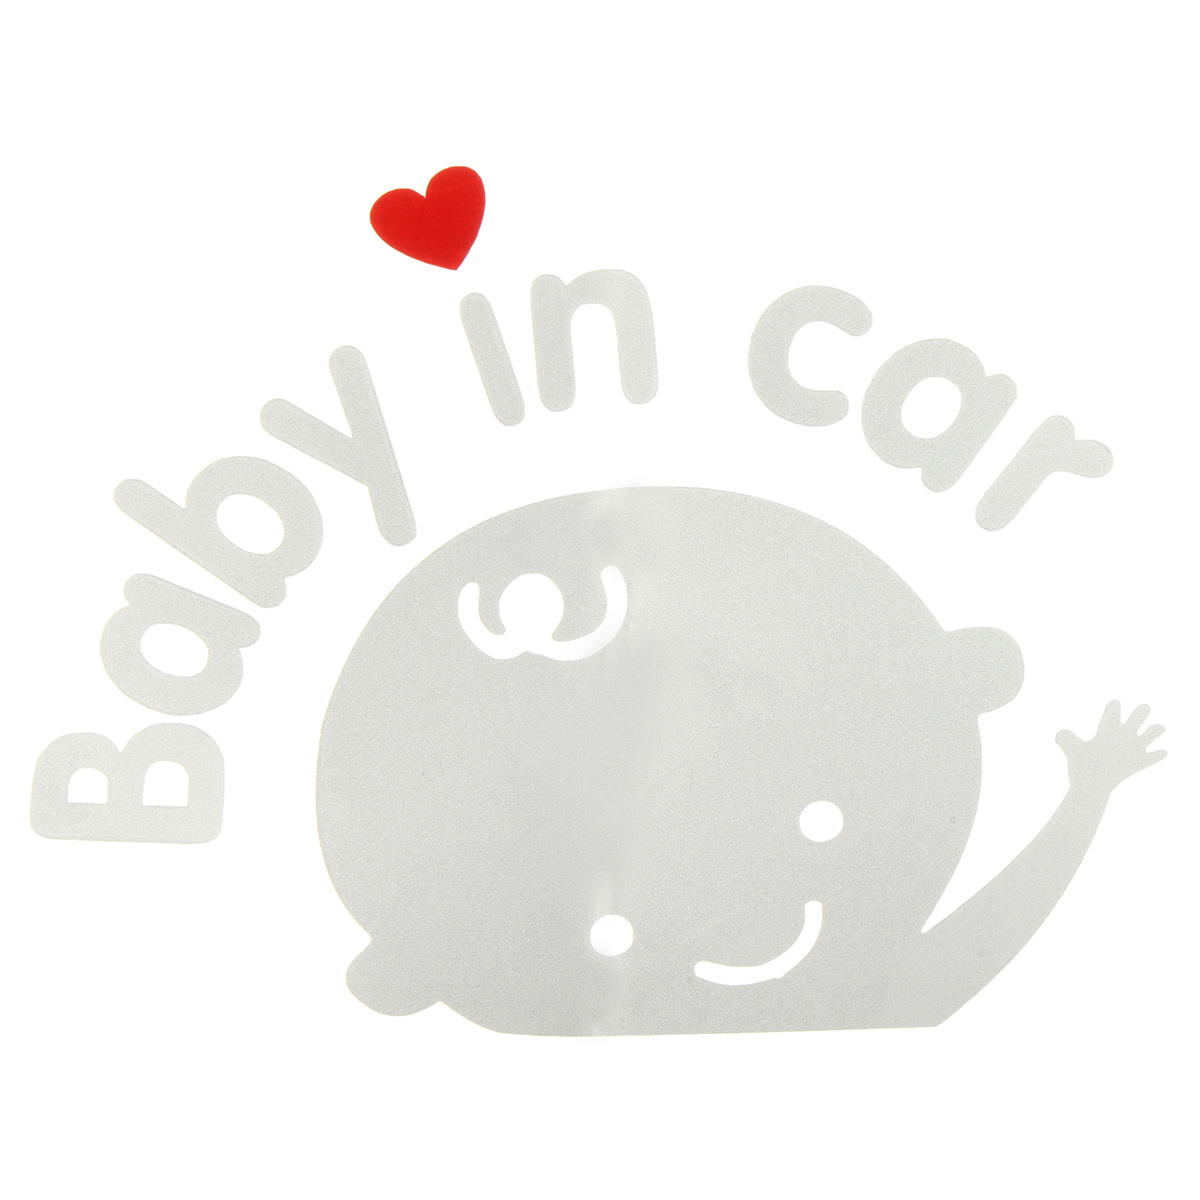 Baby-In-Car-Waving-Baby-on-Board-Safety-Sign-Cute-Car-Decal-Vinyl-Sticker-1060329